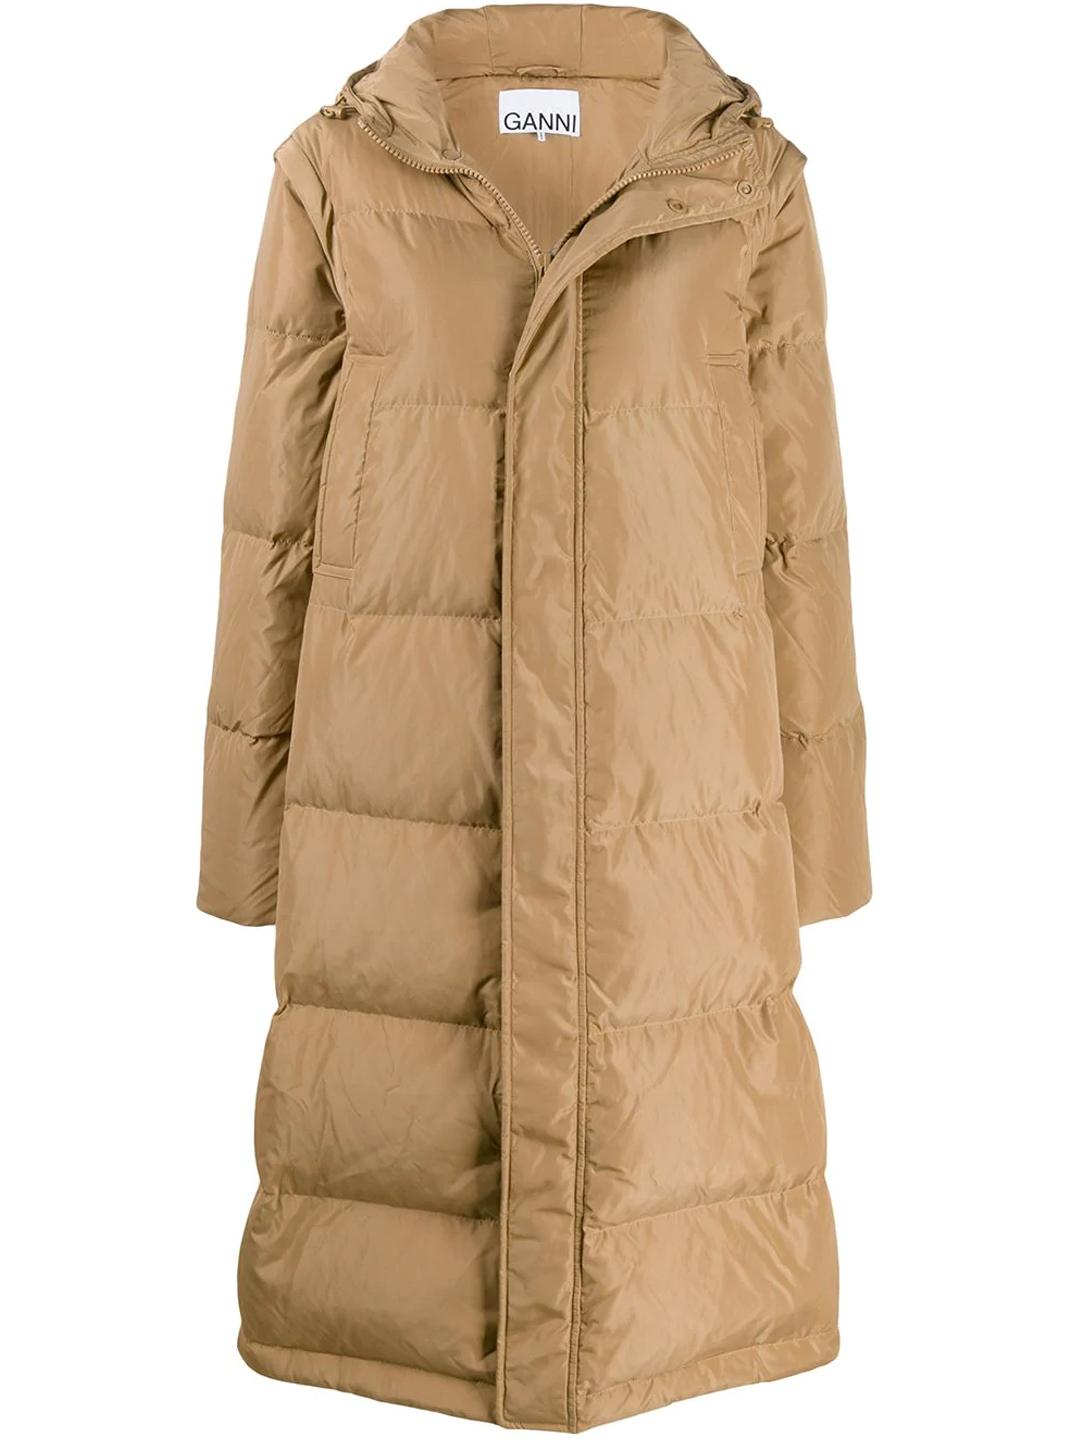 Ganni Synthetic Long Line Puffer Jacket in Camel (Natural) - Lyst